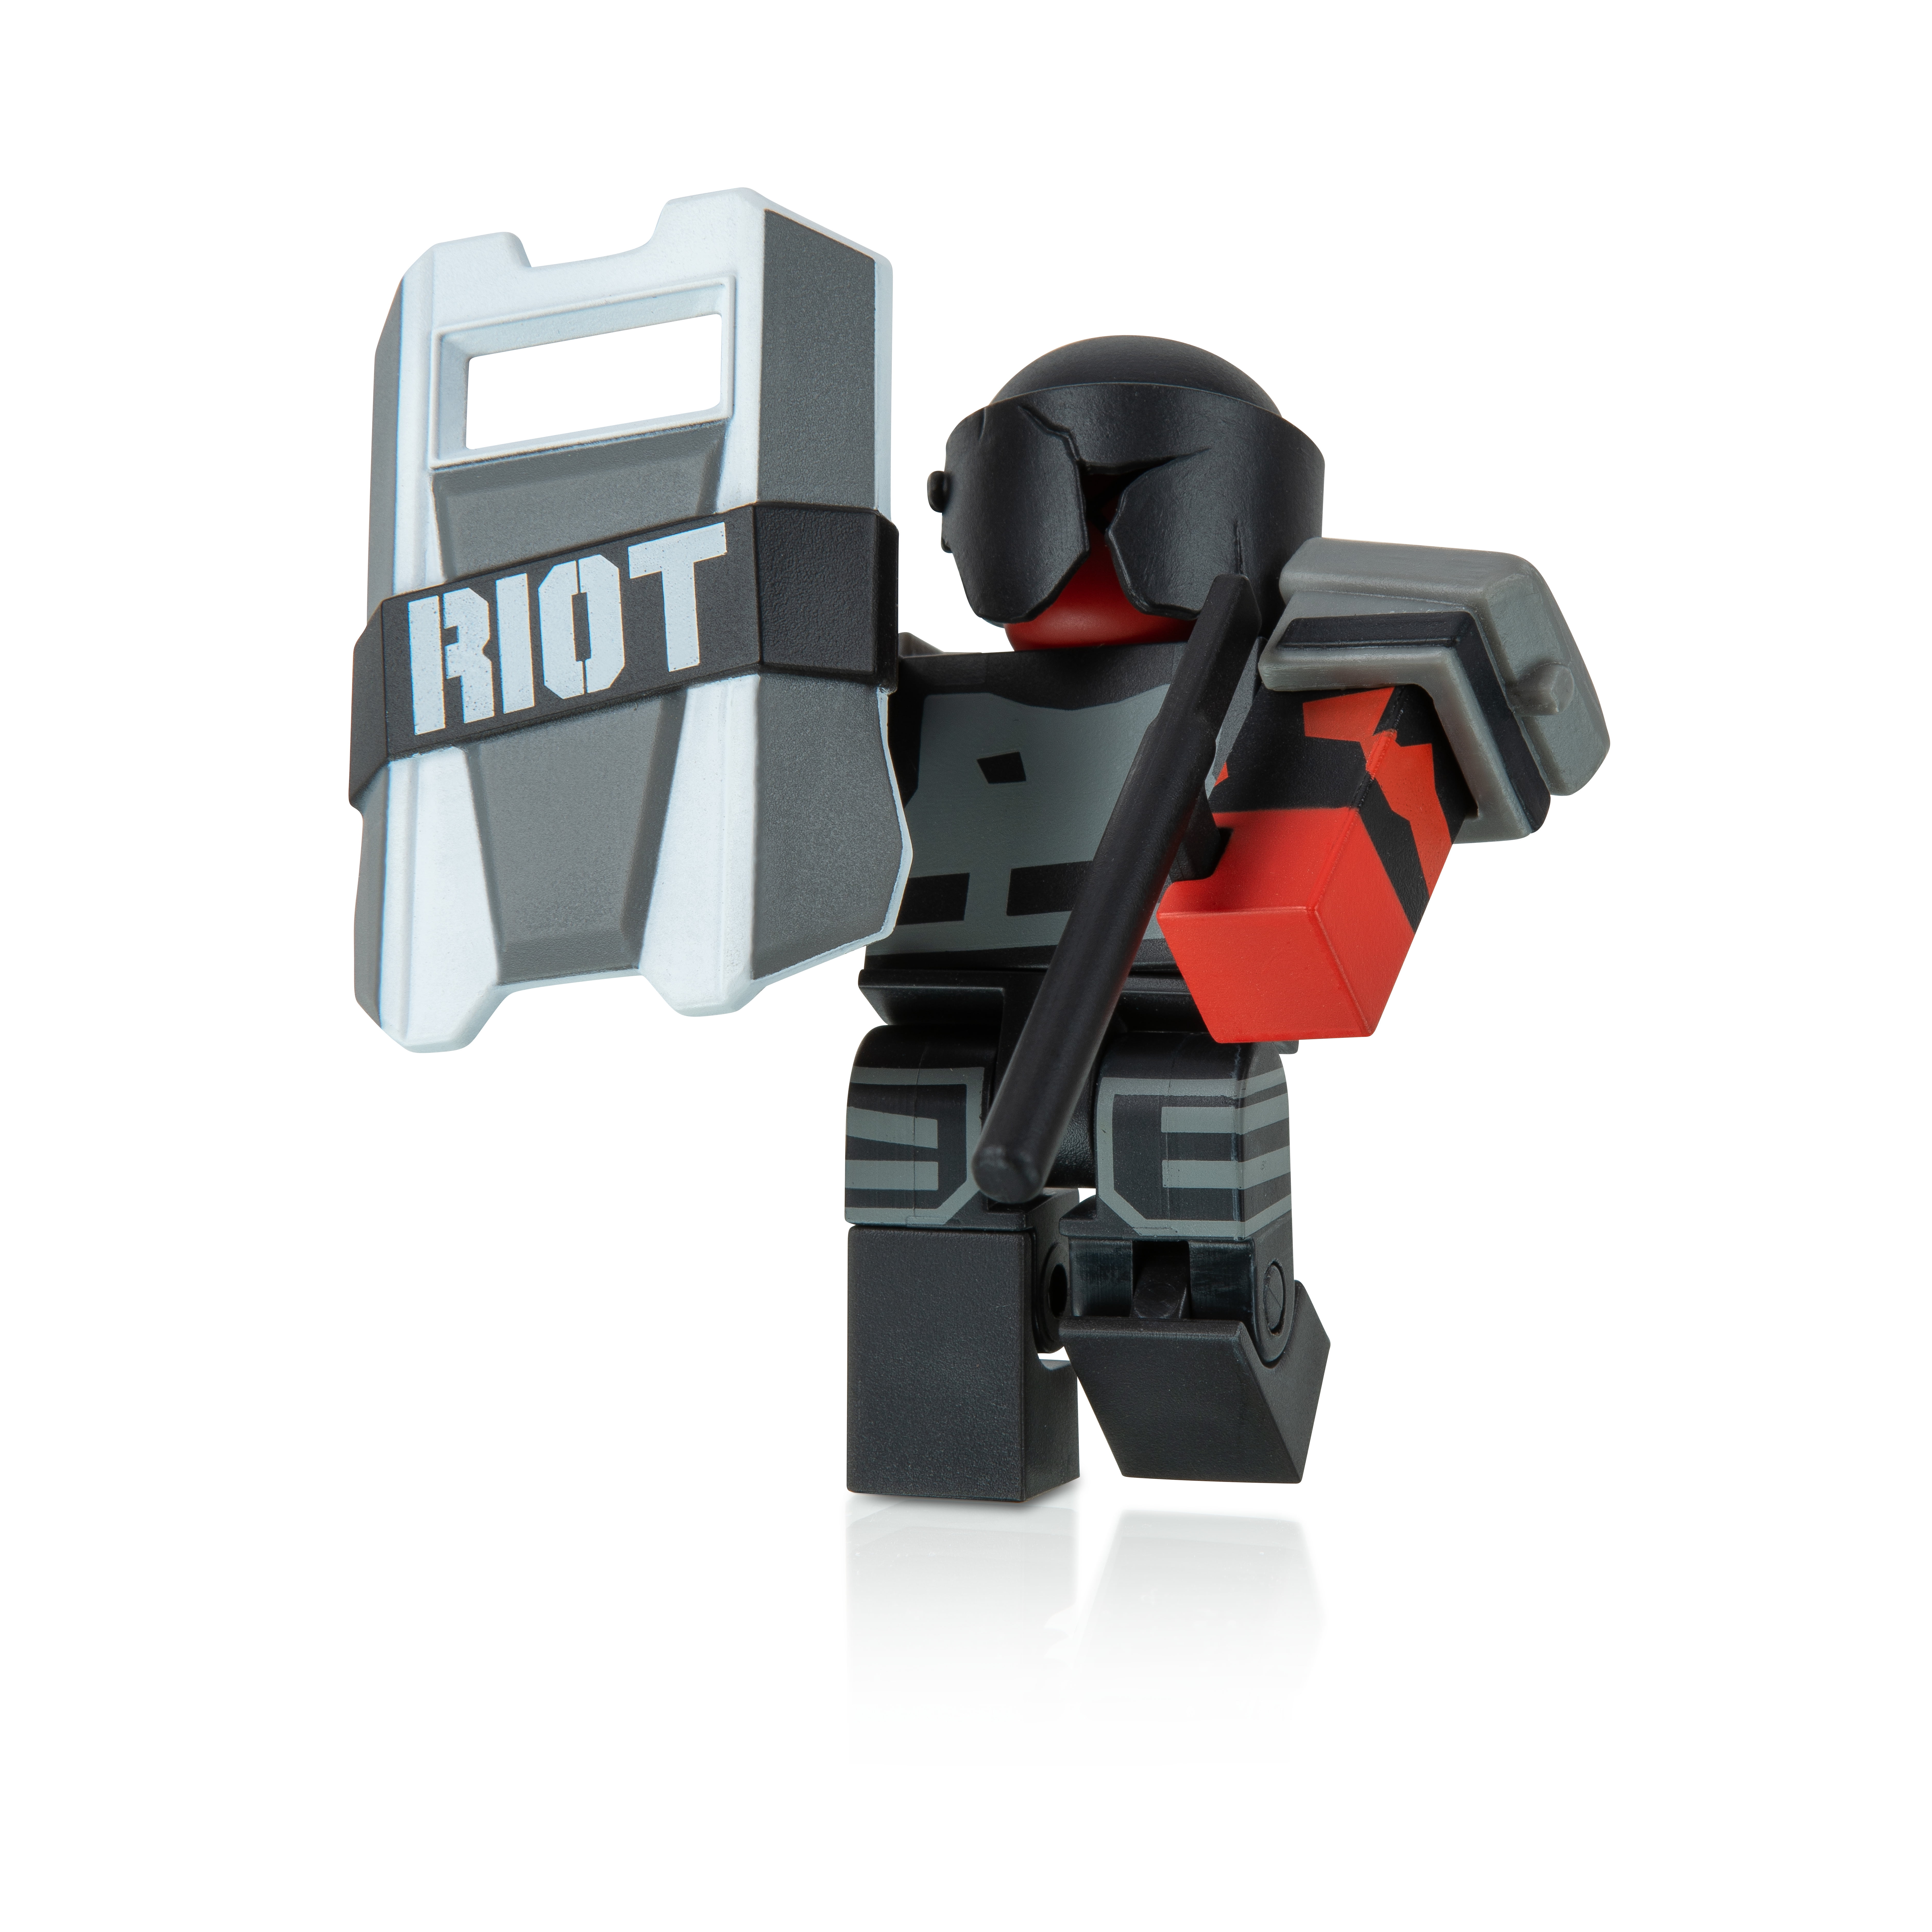 Roblox Action Collection - Tower Defense Simulator: The Riot